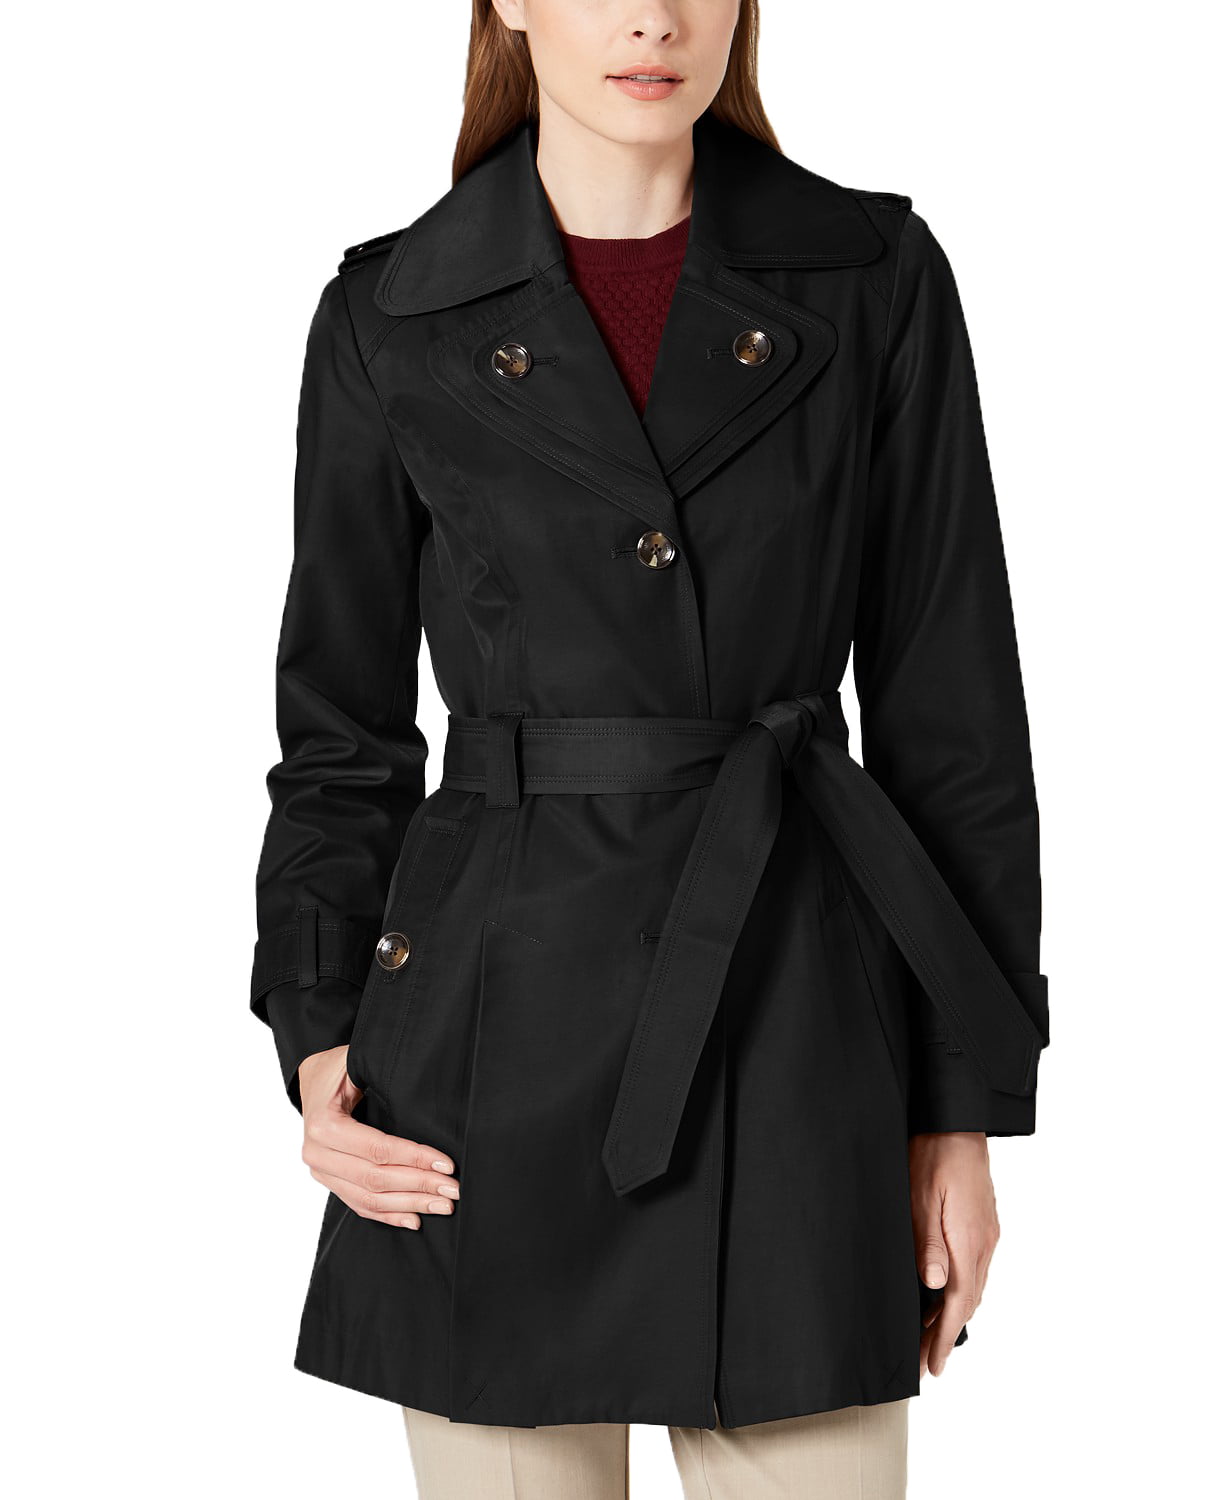 www.couturepoint.com-london-fog-womens-petite-black-belted-hooded-trench-coat